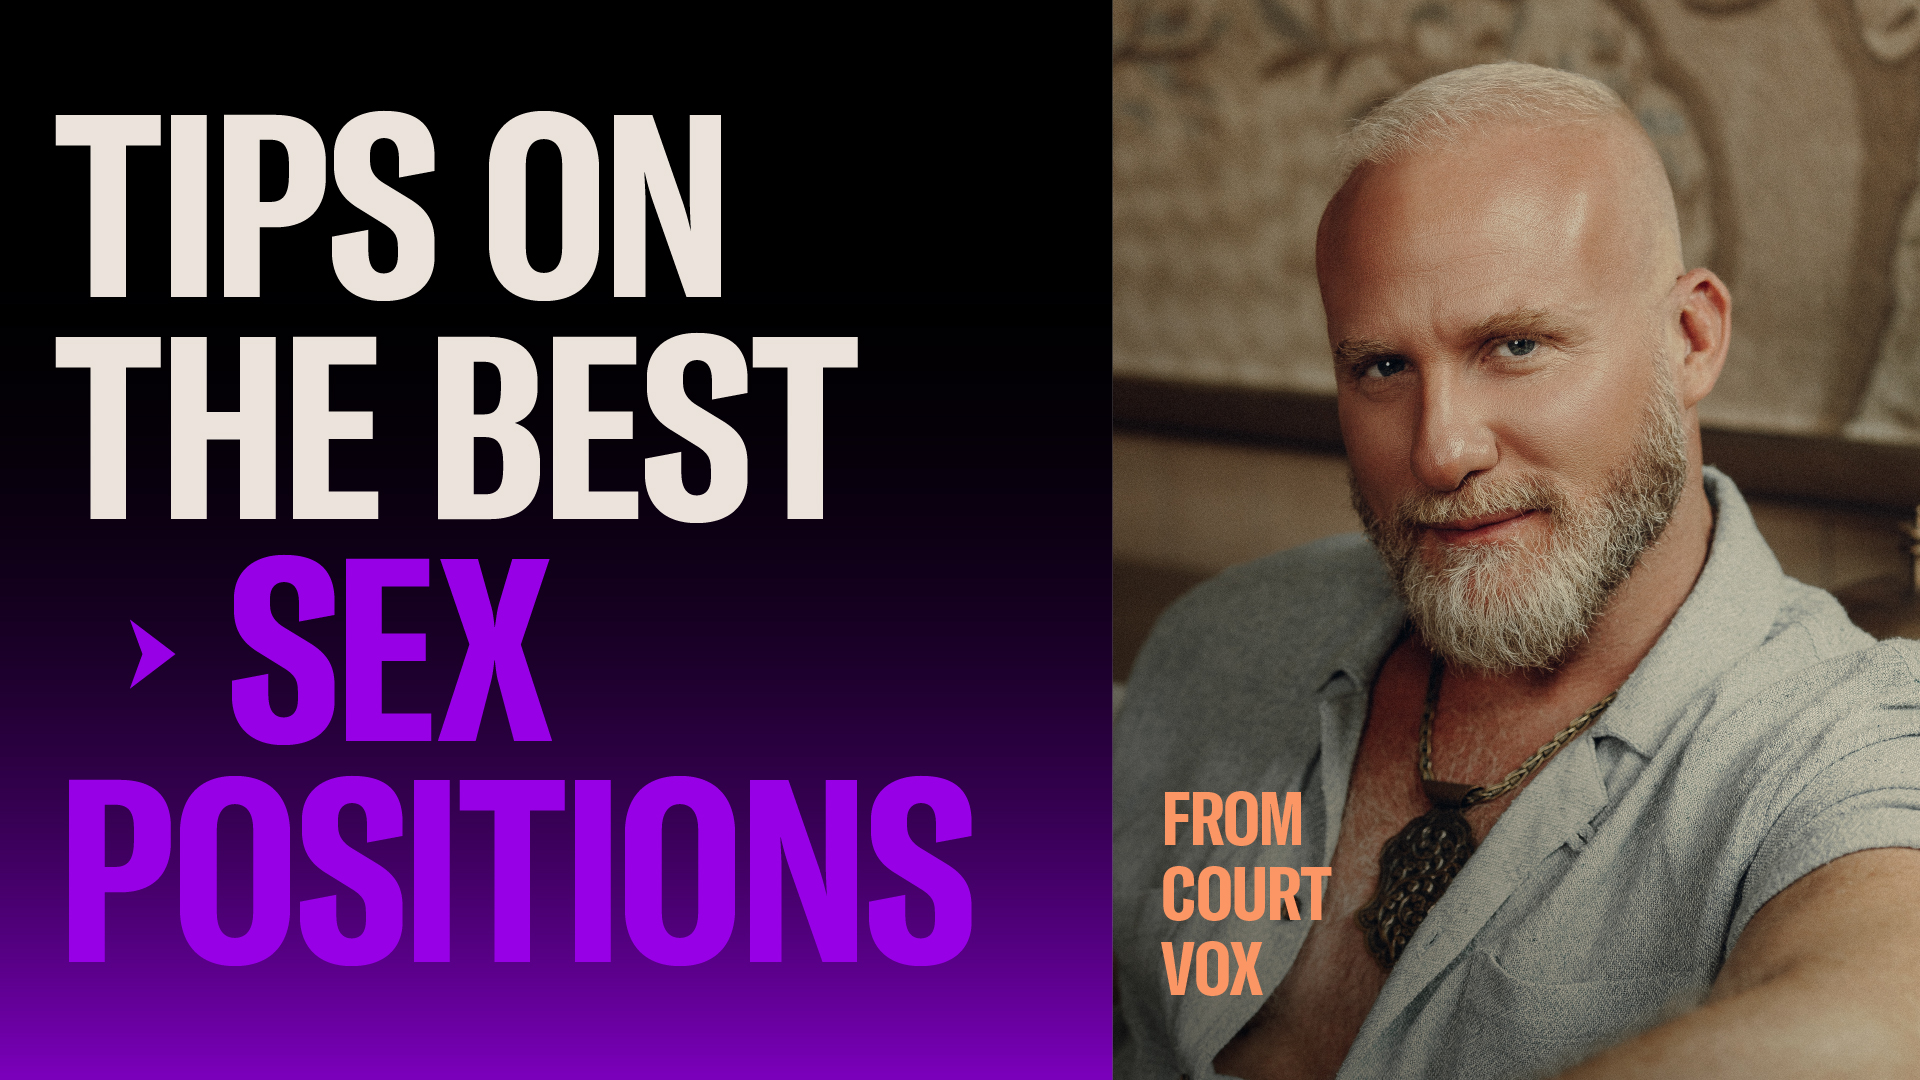 TIPS ON THE BEST GAY SEX POSITIONS FROM COURT VOX  Court Vox is a certified sex & intimacy coach based in L.A. He is a member of the World Association of Sex Coaches and founder of The Bodyvox.